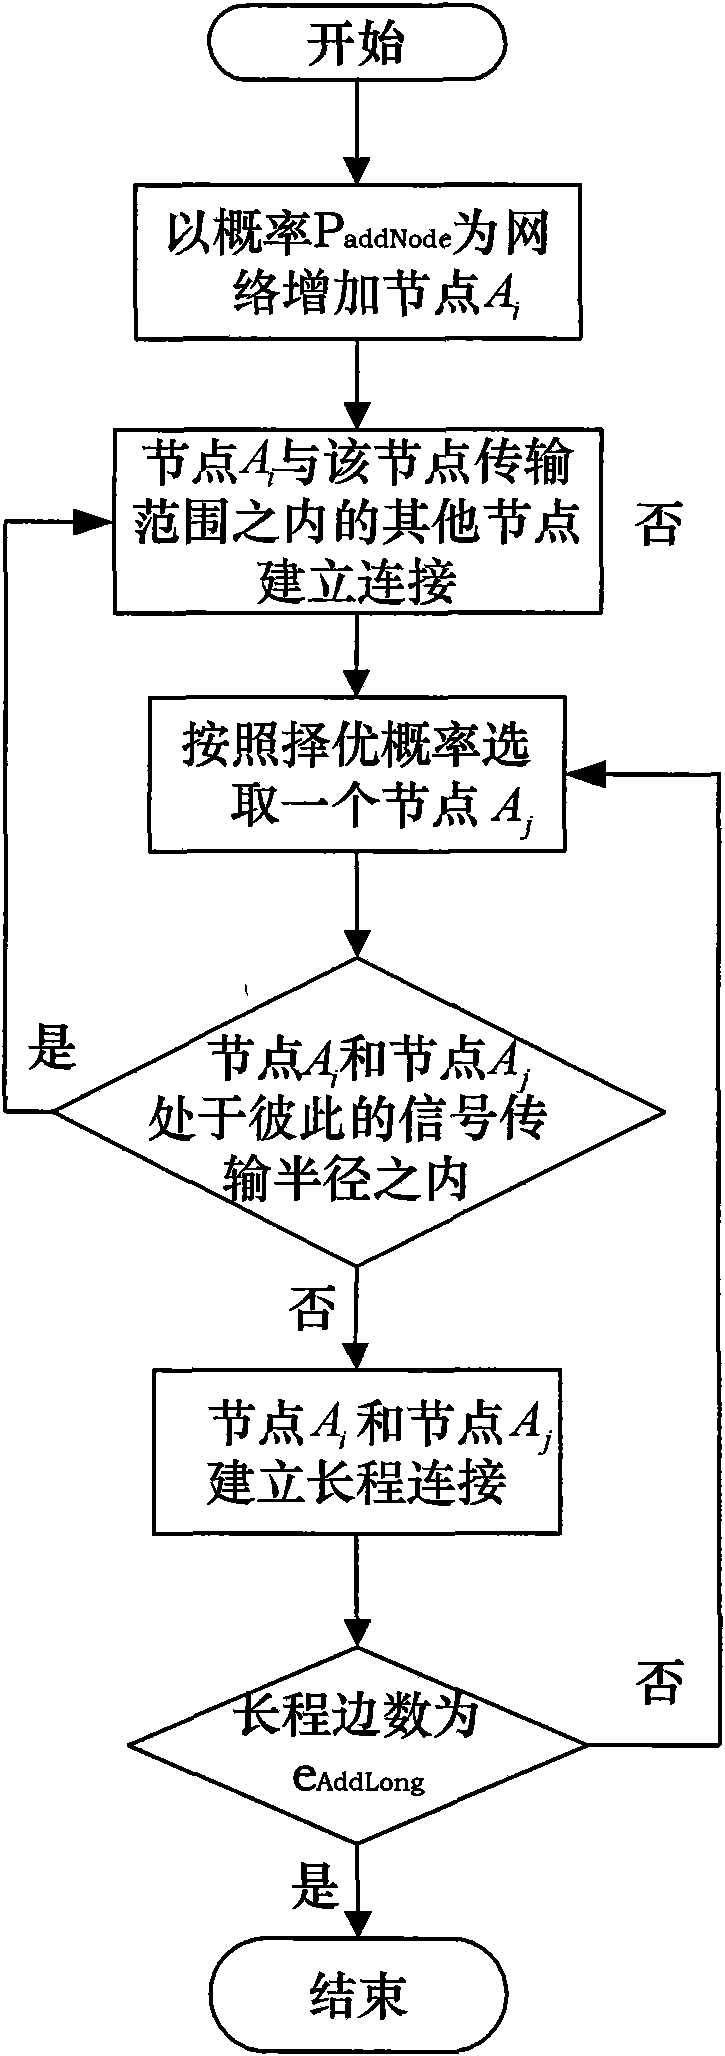 Mobile scale-free self-organizing network model building method